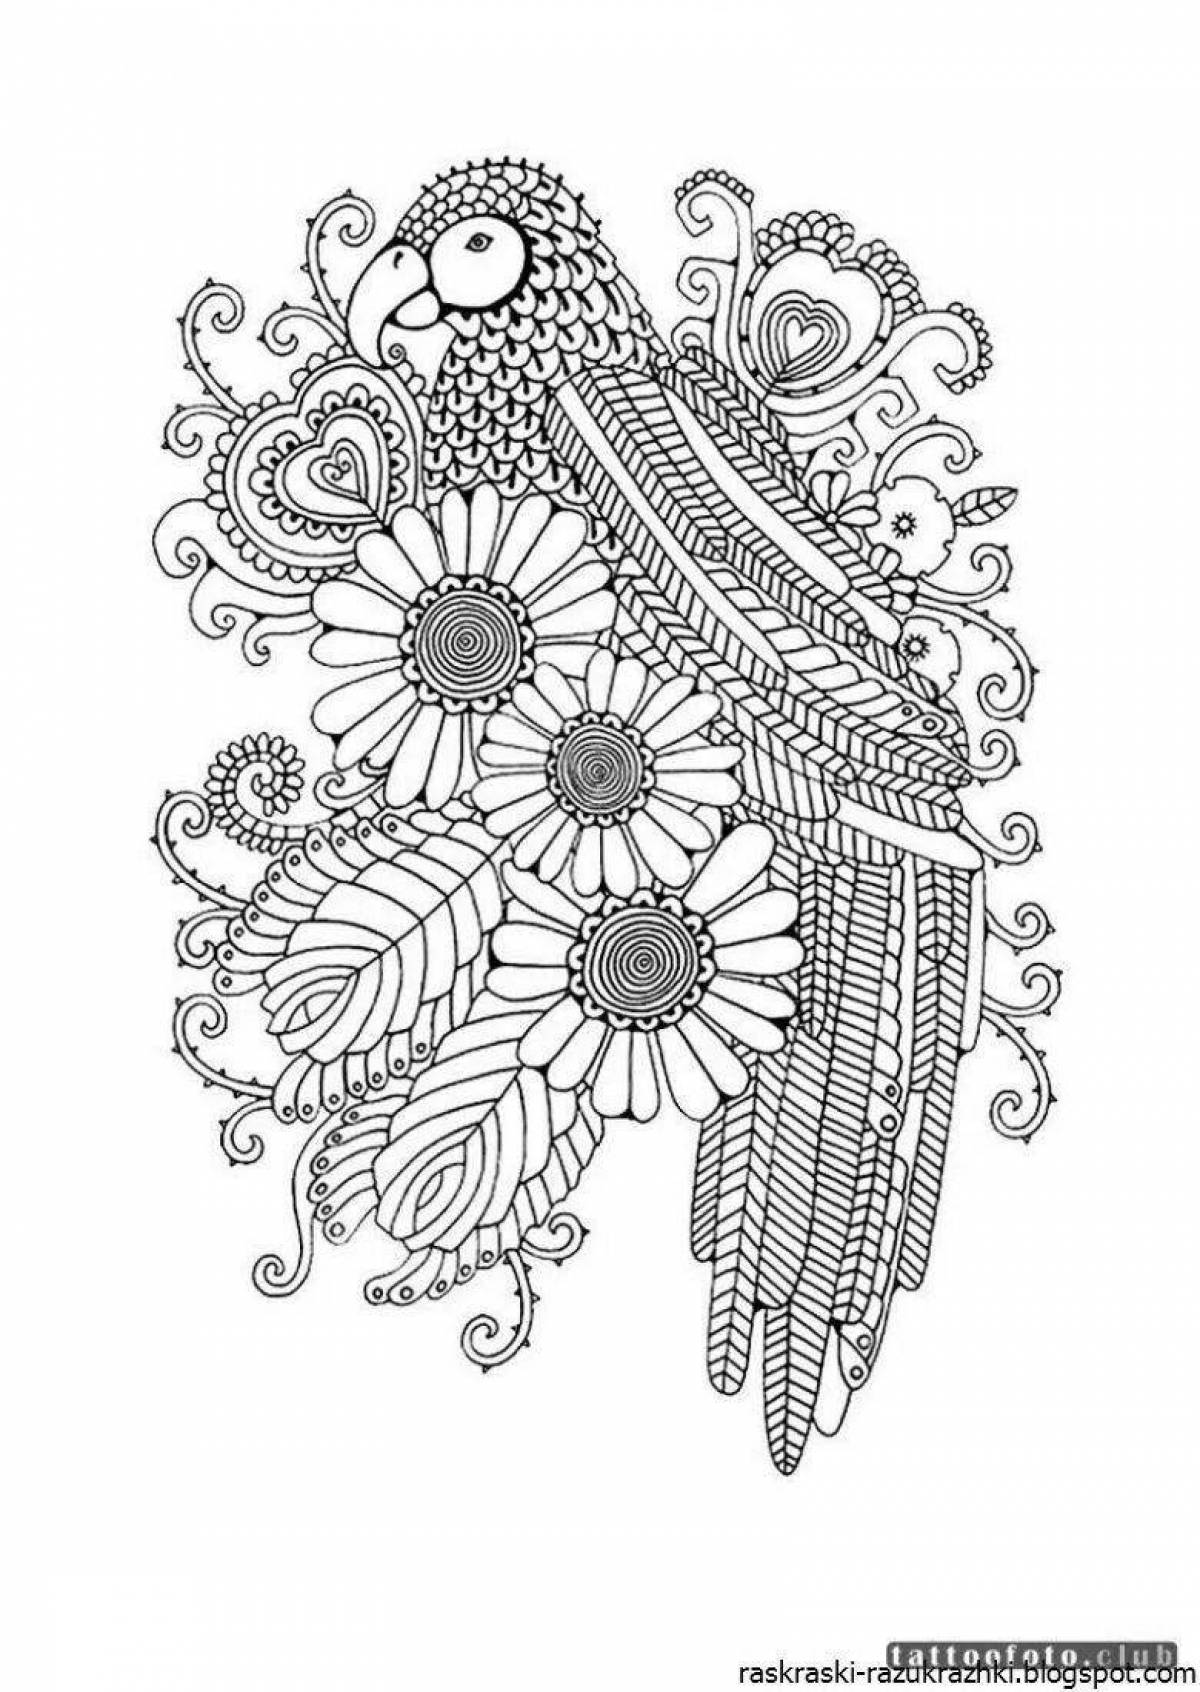 Coloring pages with intricate patterns for girls